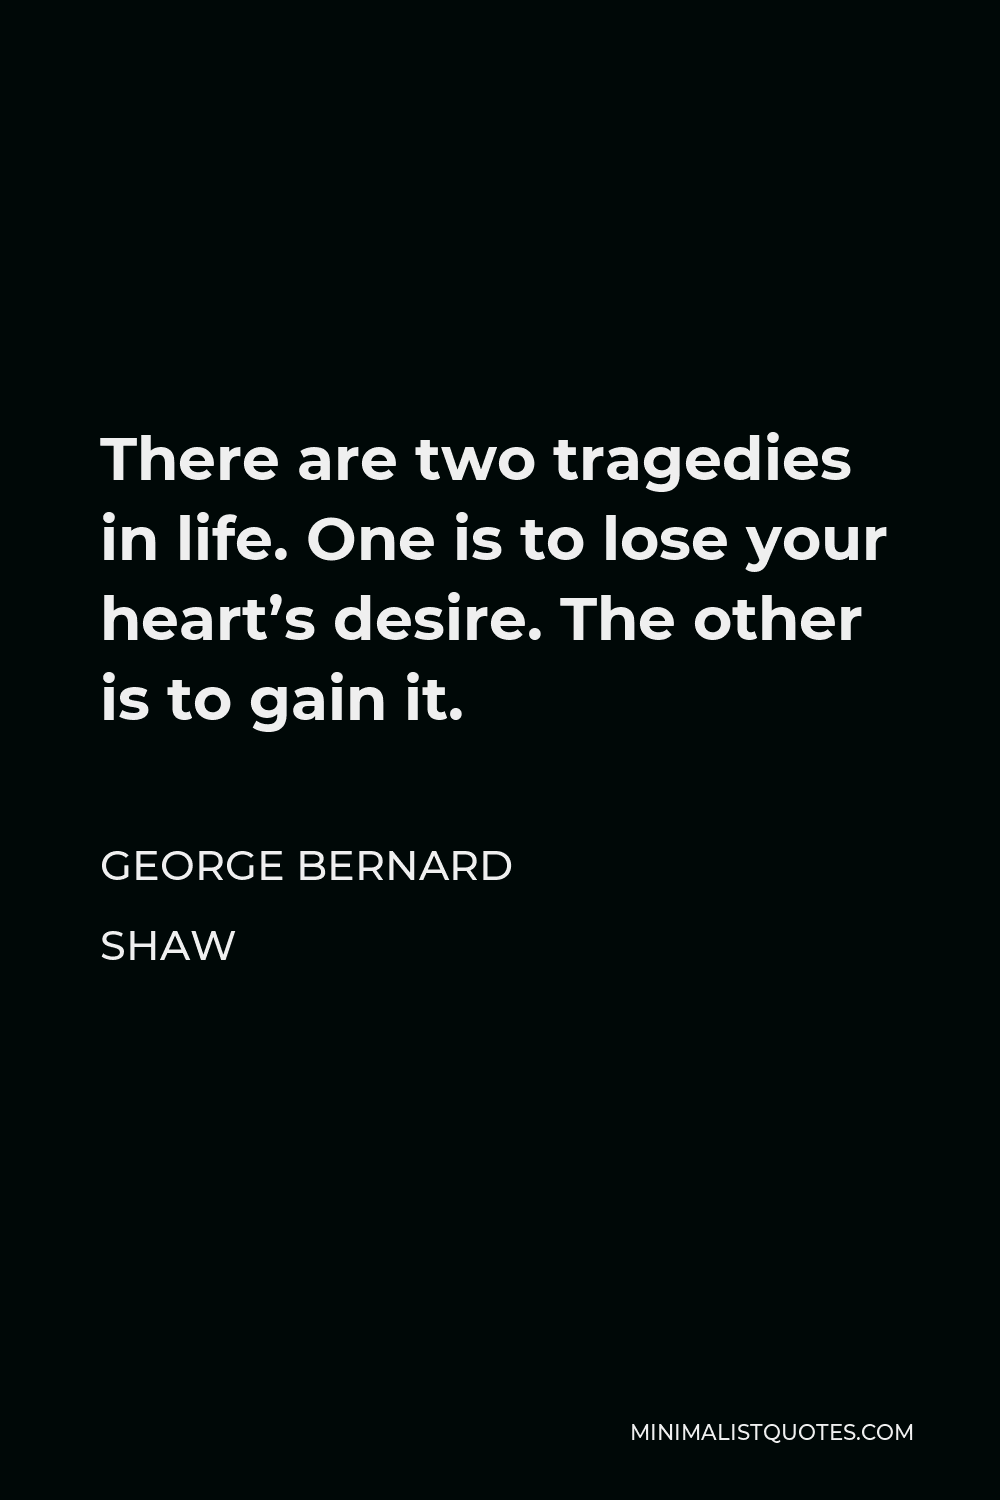 George Bernard Shaw Quote - There are two tragedies in life. One is to lose your heart’s desire. The other is to gain it.